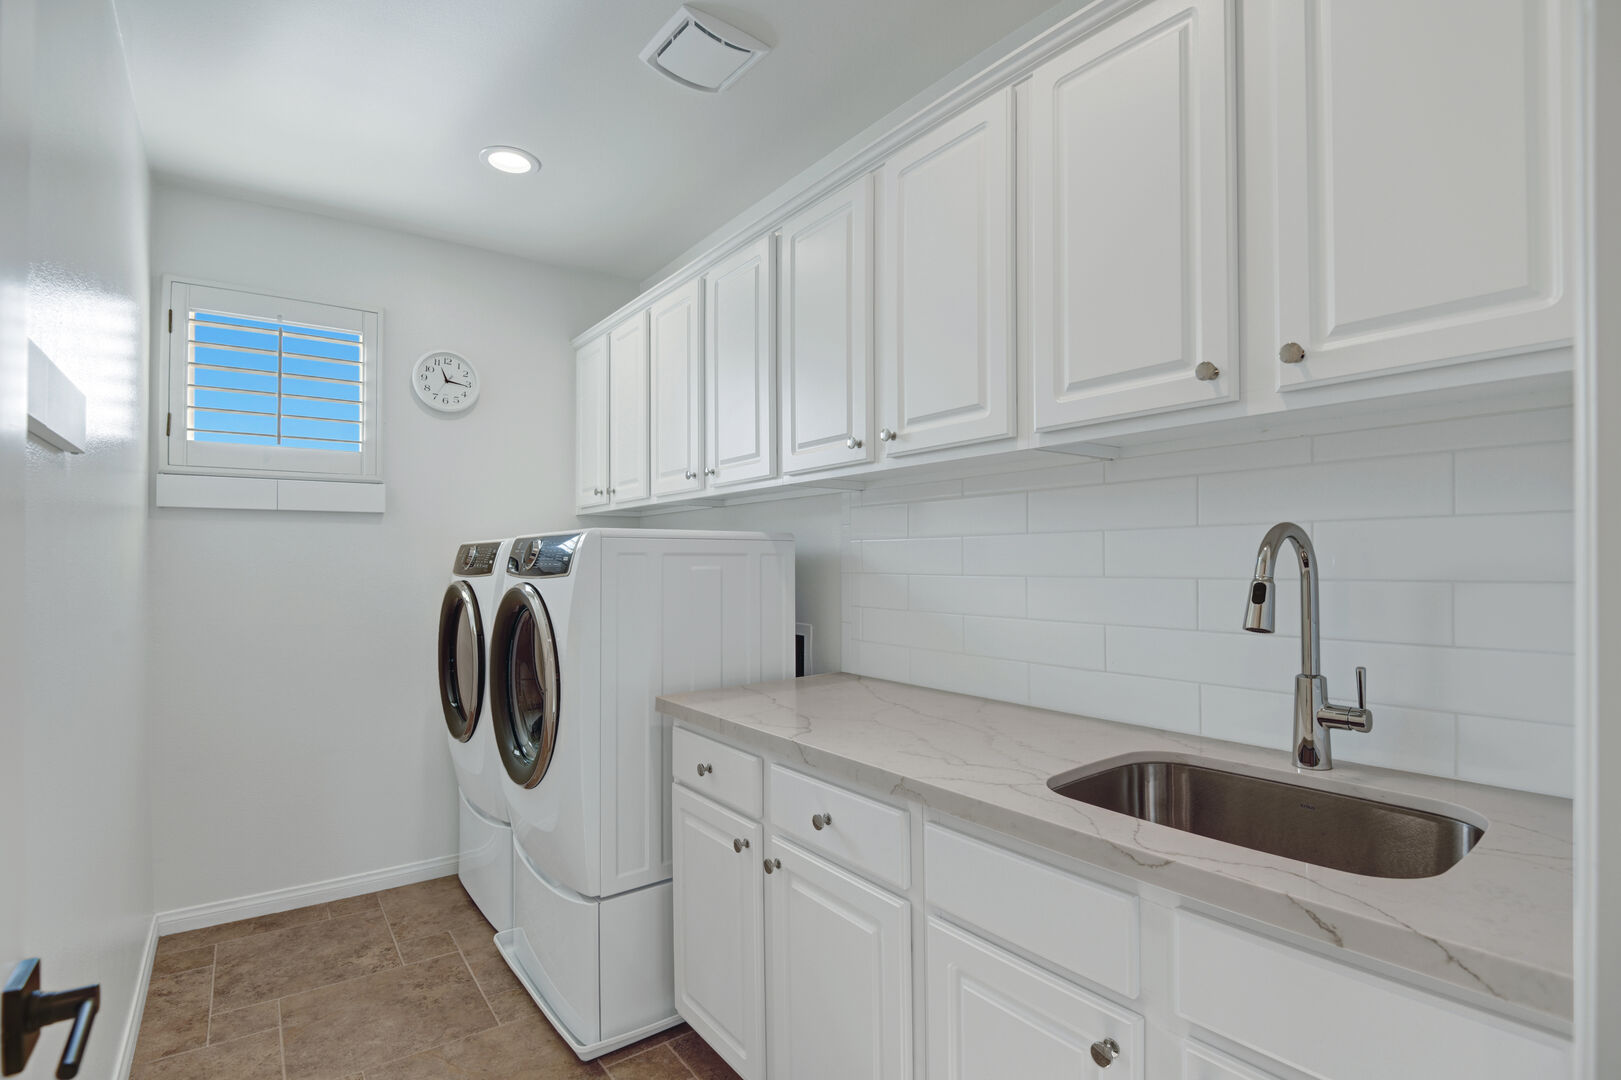 The laundry room is complete with matching washer and dryer, ample cabinet storage, and a convenient sink for added functionality.